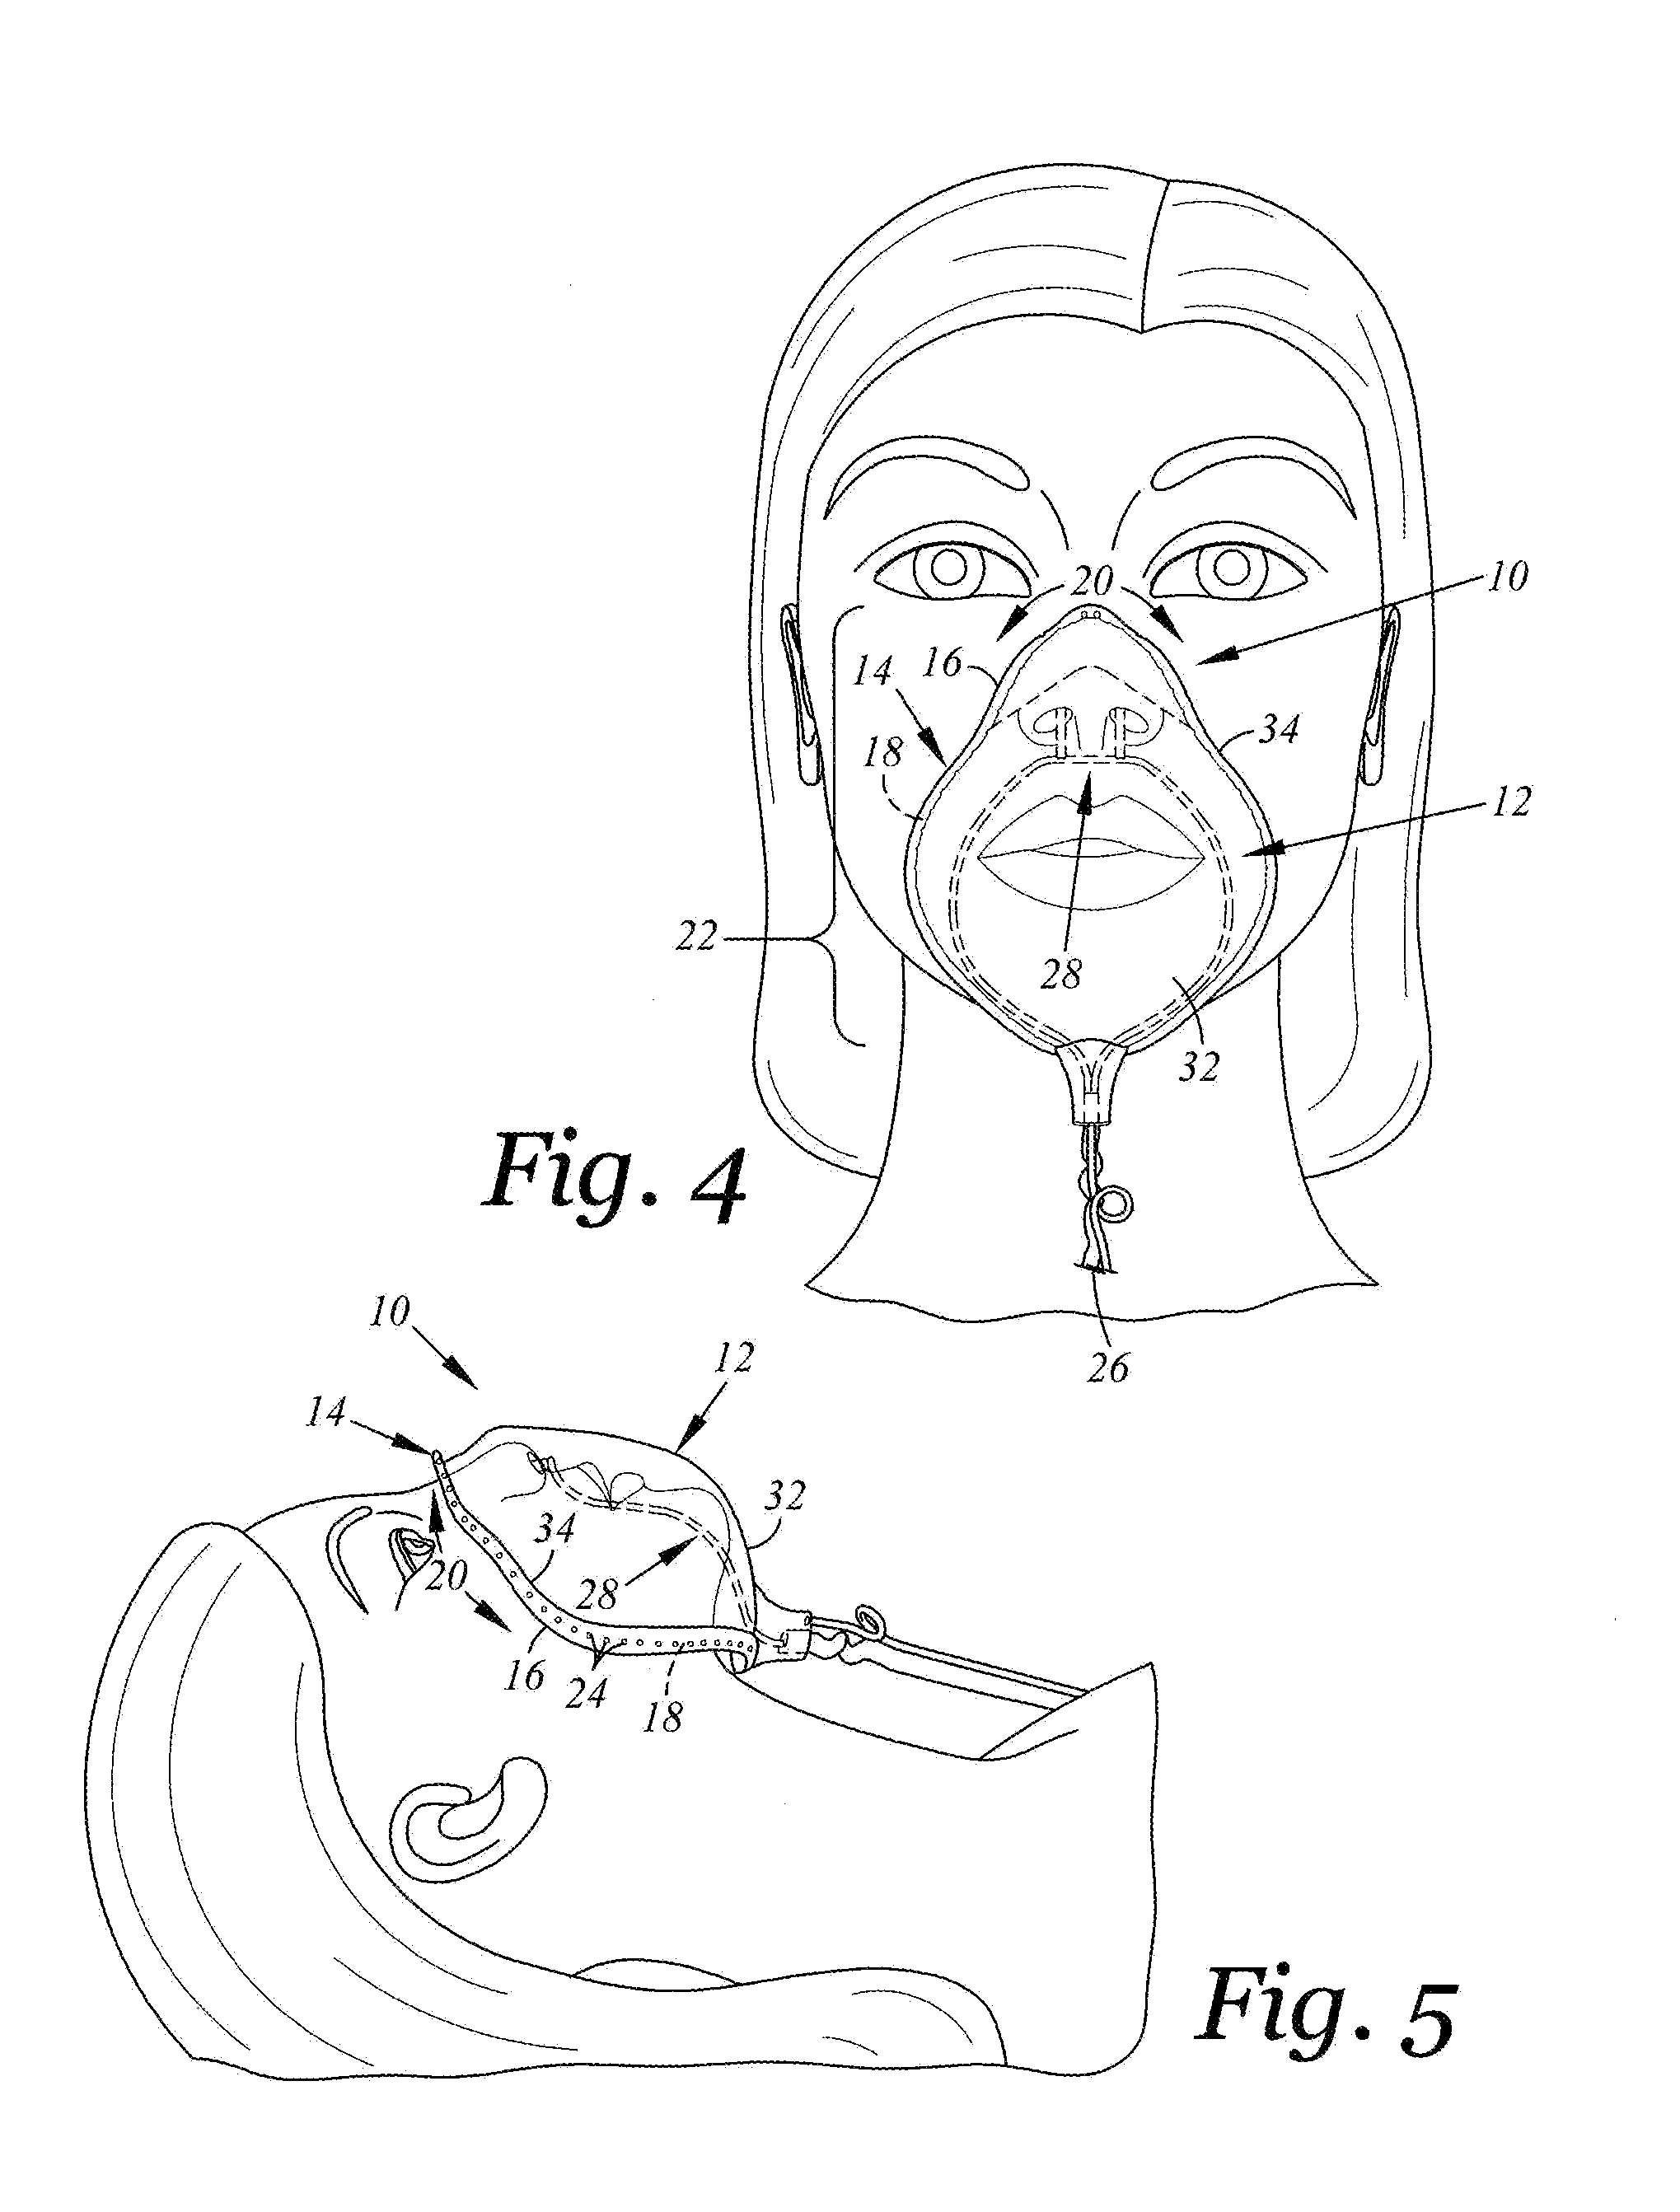 Devices and methods for surgical fire prevention